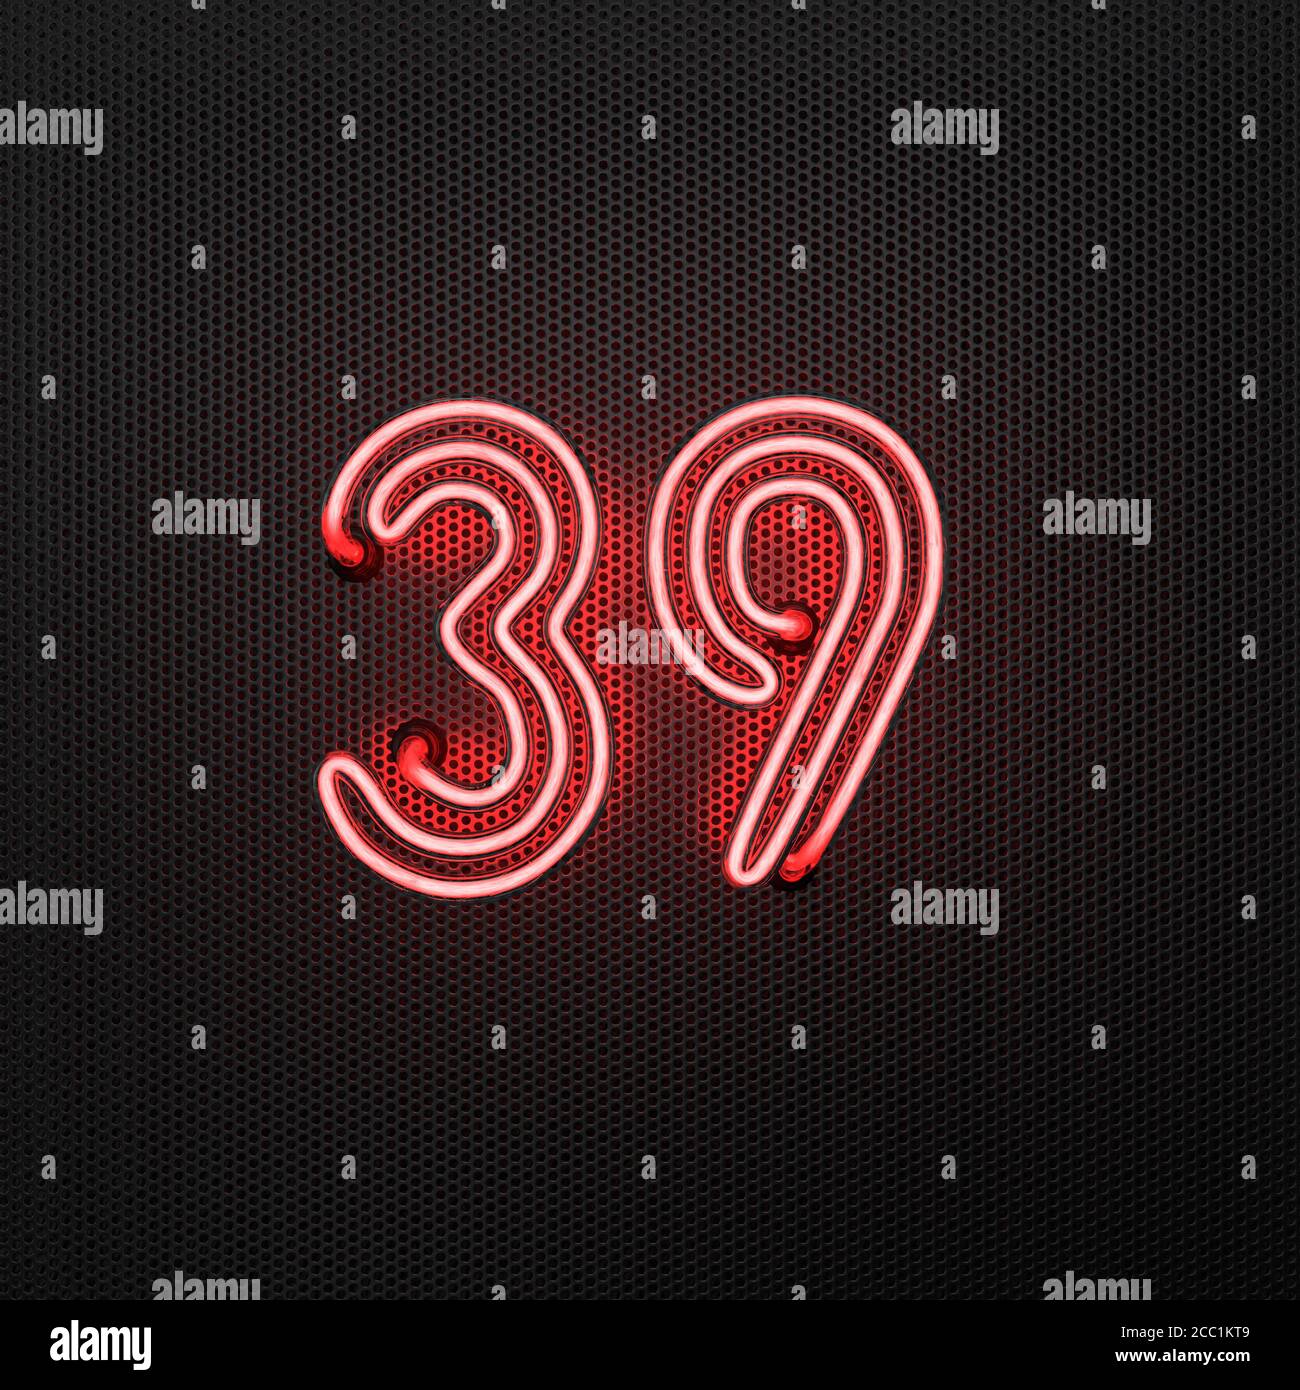 Glowing red neon number 39 (number thirty-nine) on a perforated metal background. 3D illustration Stock Photo